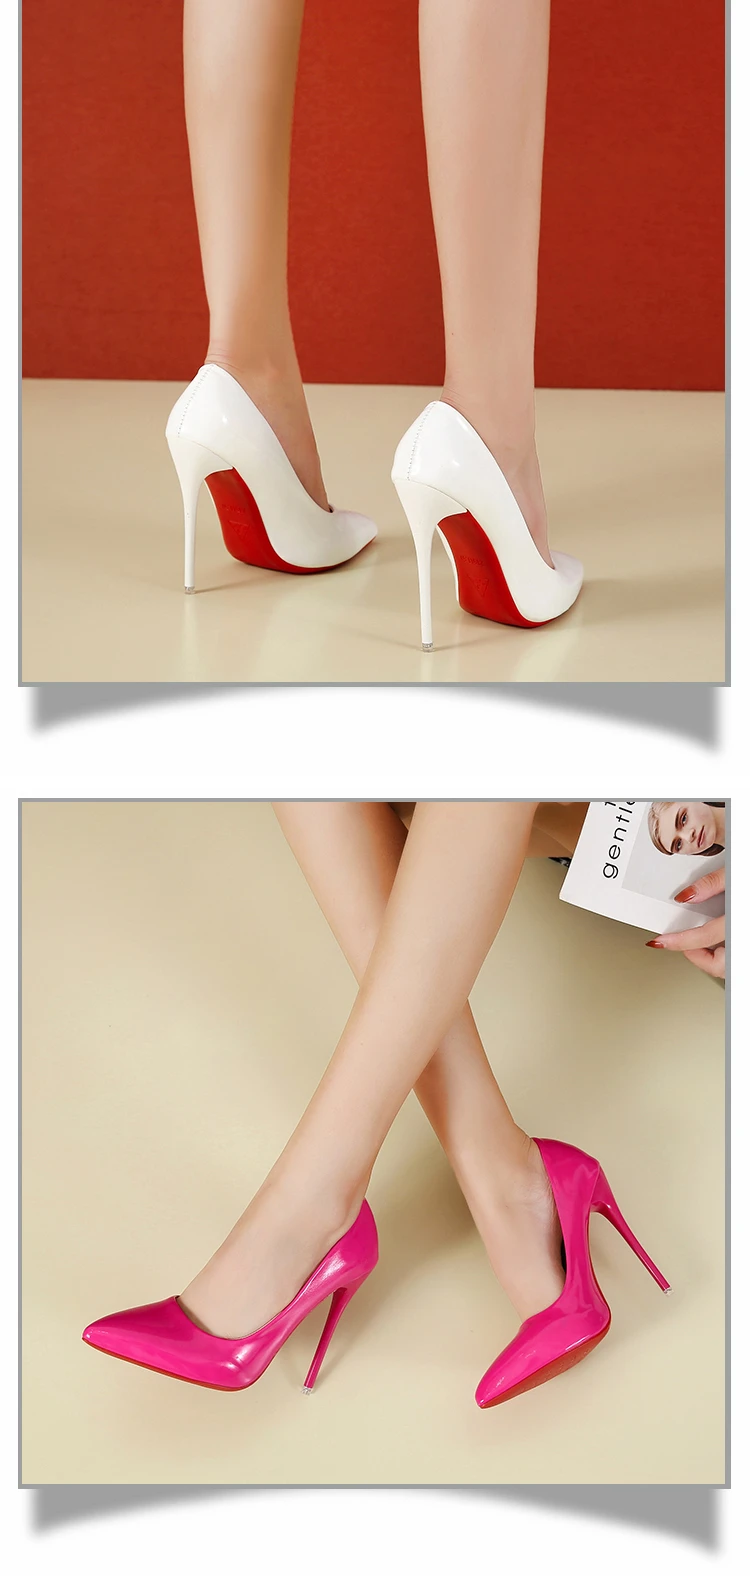 Jimmy Choo  Red high heel shoes, Red bottom shoes, Red bottom high heels